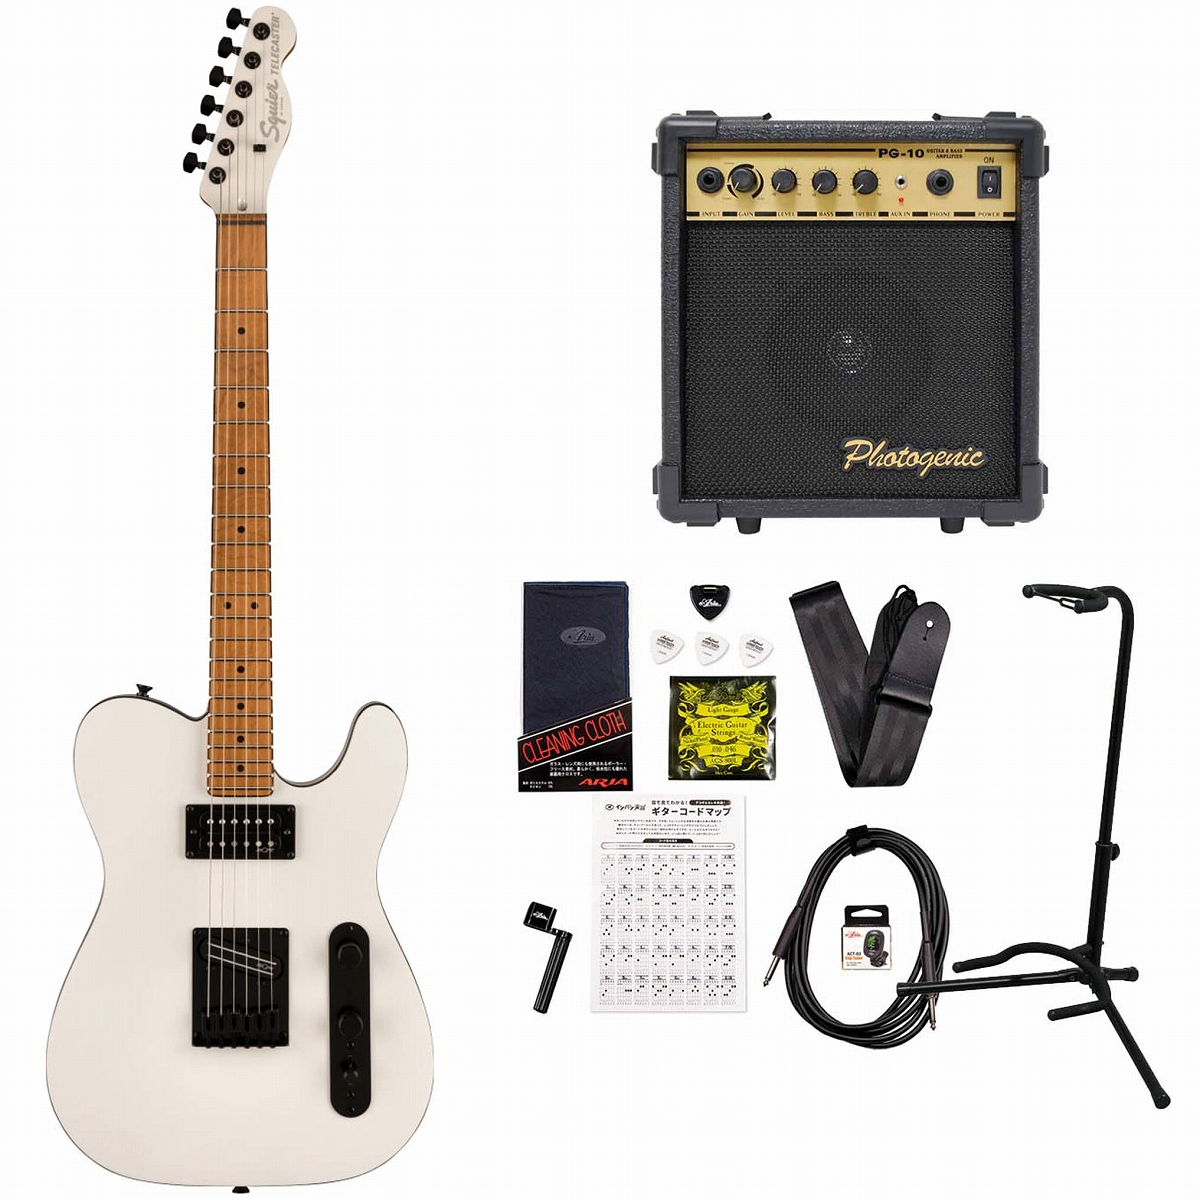 Pearl　White　Telecaster　イシバシ楽器　Squier　RH　Mple　Contemporary　Roasted　PG-10アンプ付属エレキギター初心者セット